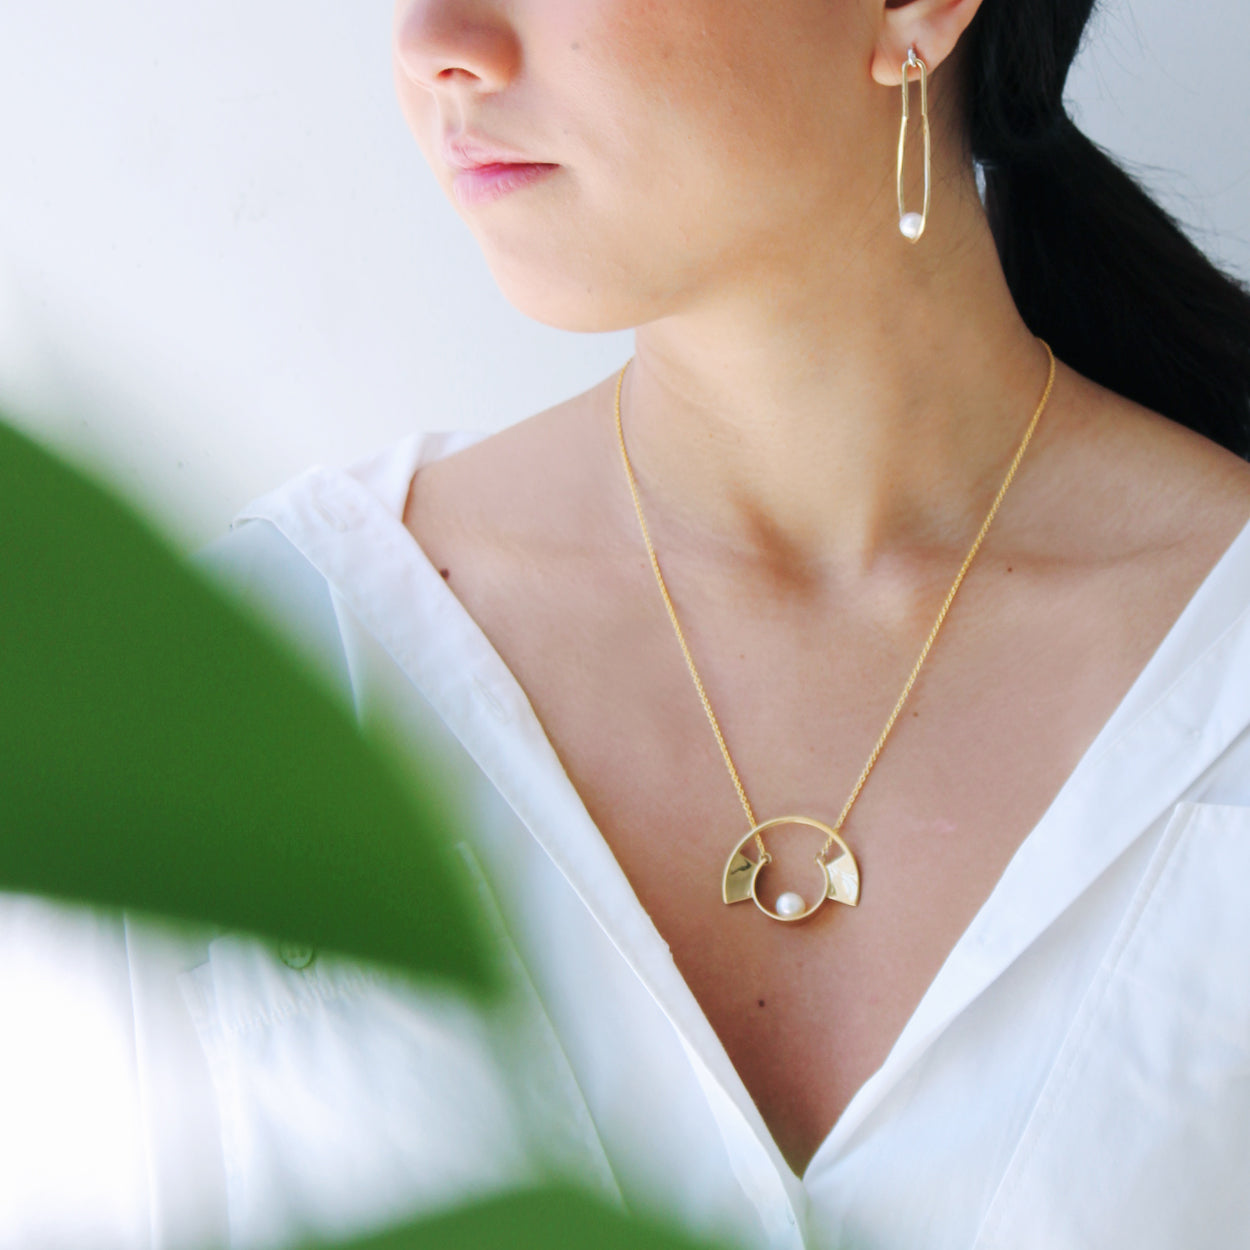 Yuyu Necklace- Pearl